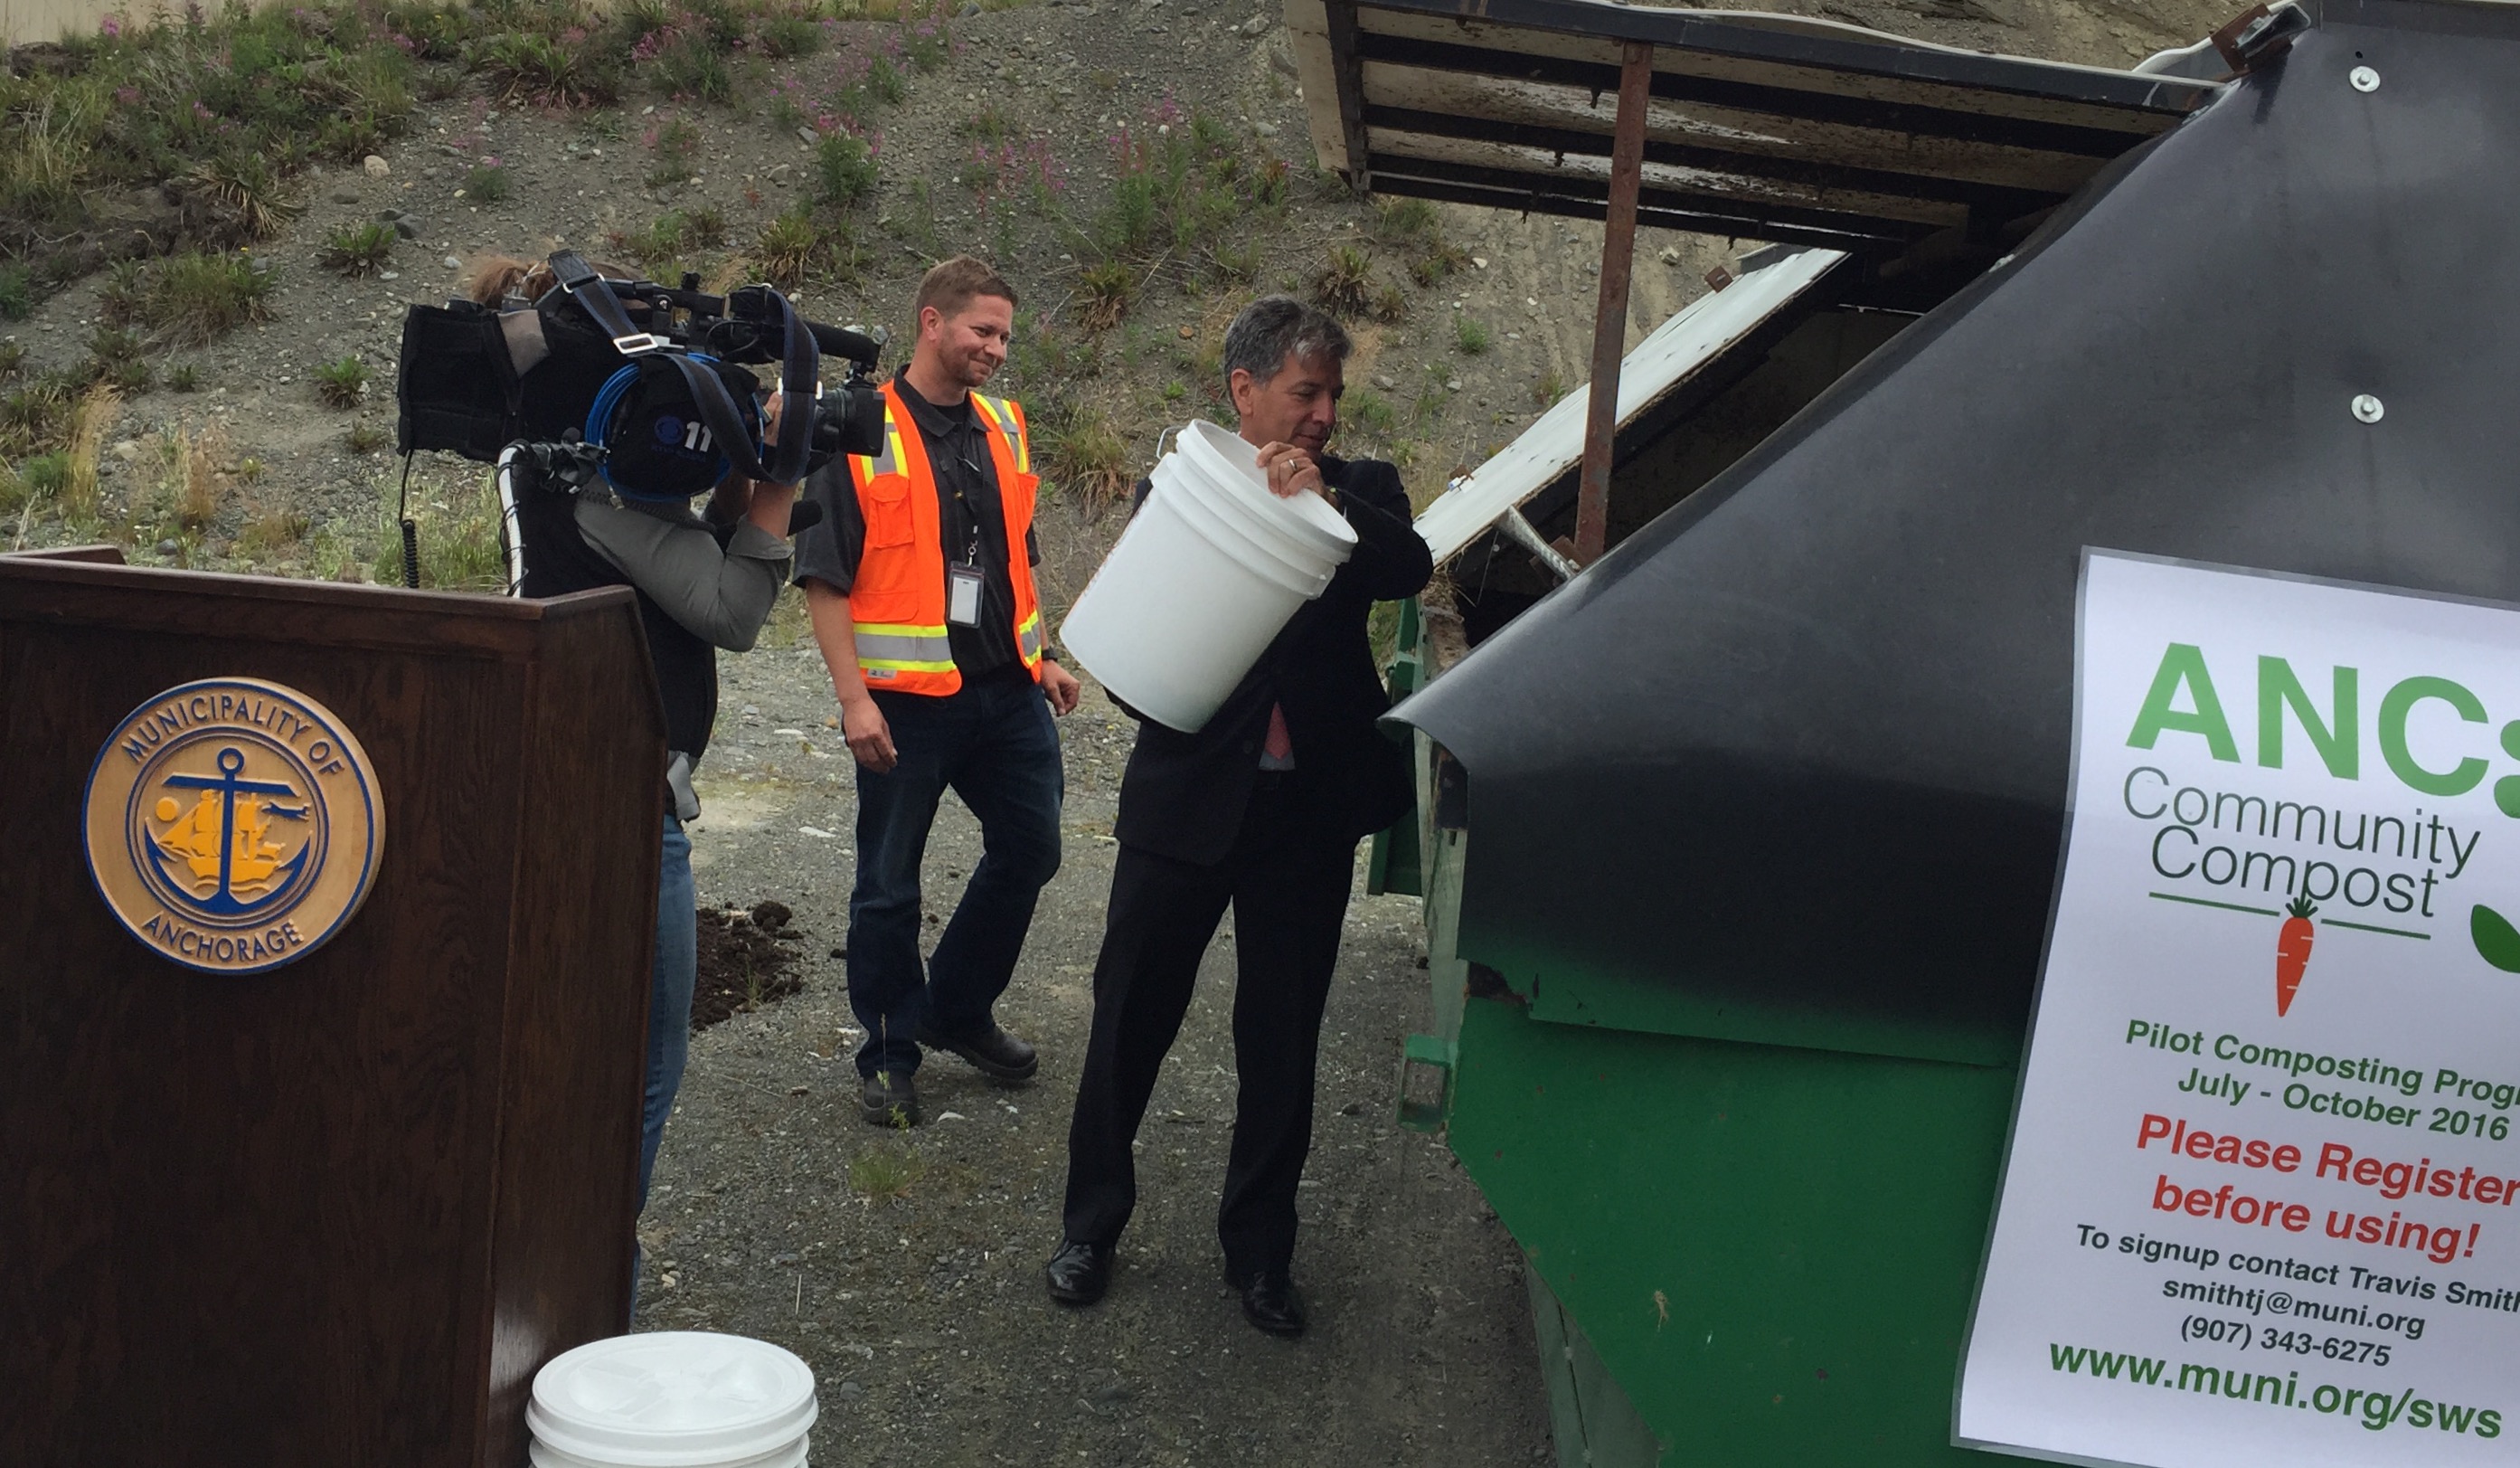 Mayor Berkowitz throwing in the first bucket of food scraps. SWS Director Mark Spafford is in the background. (Photo courtesy of SWS Recycling)